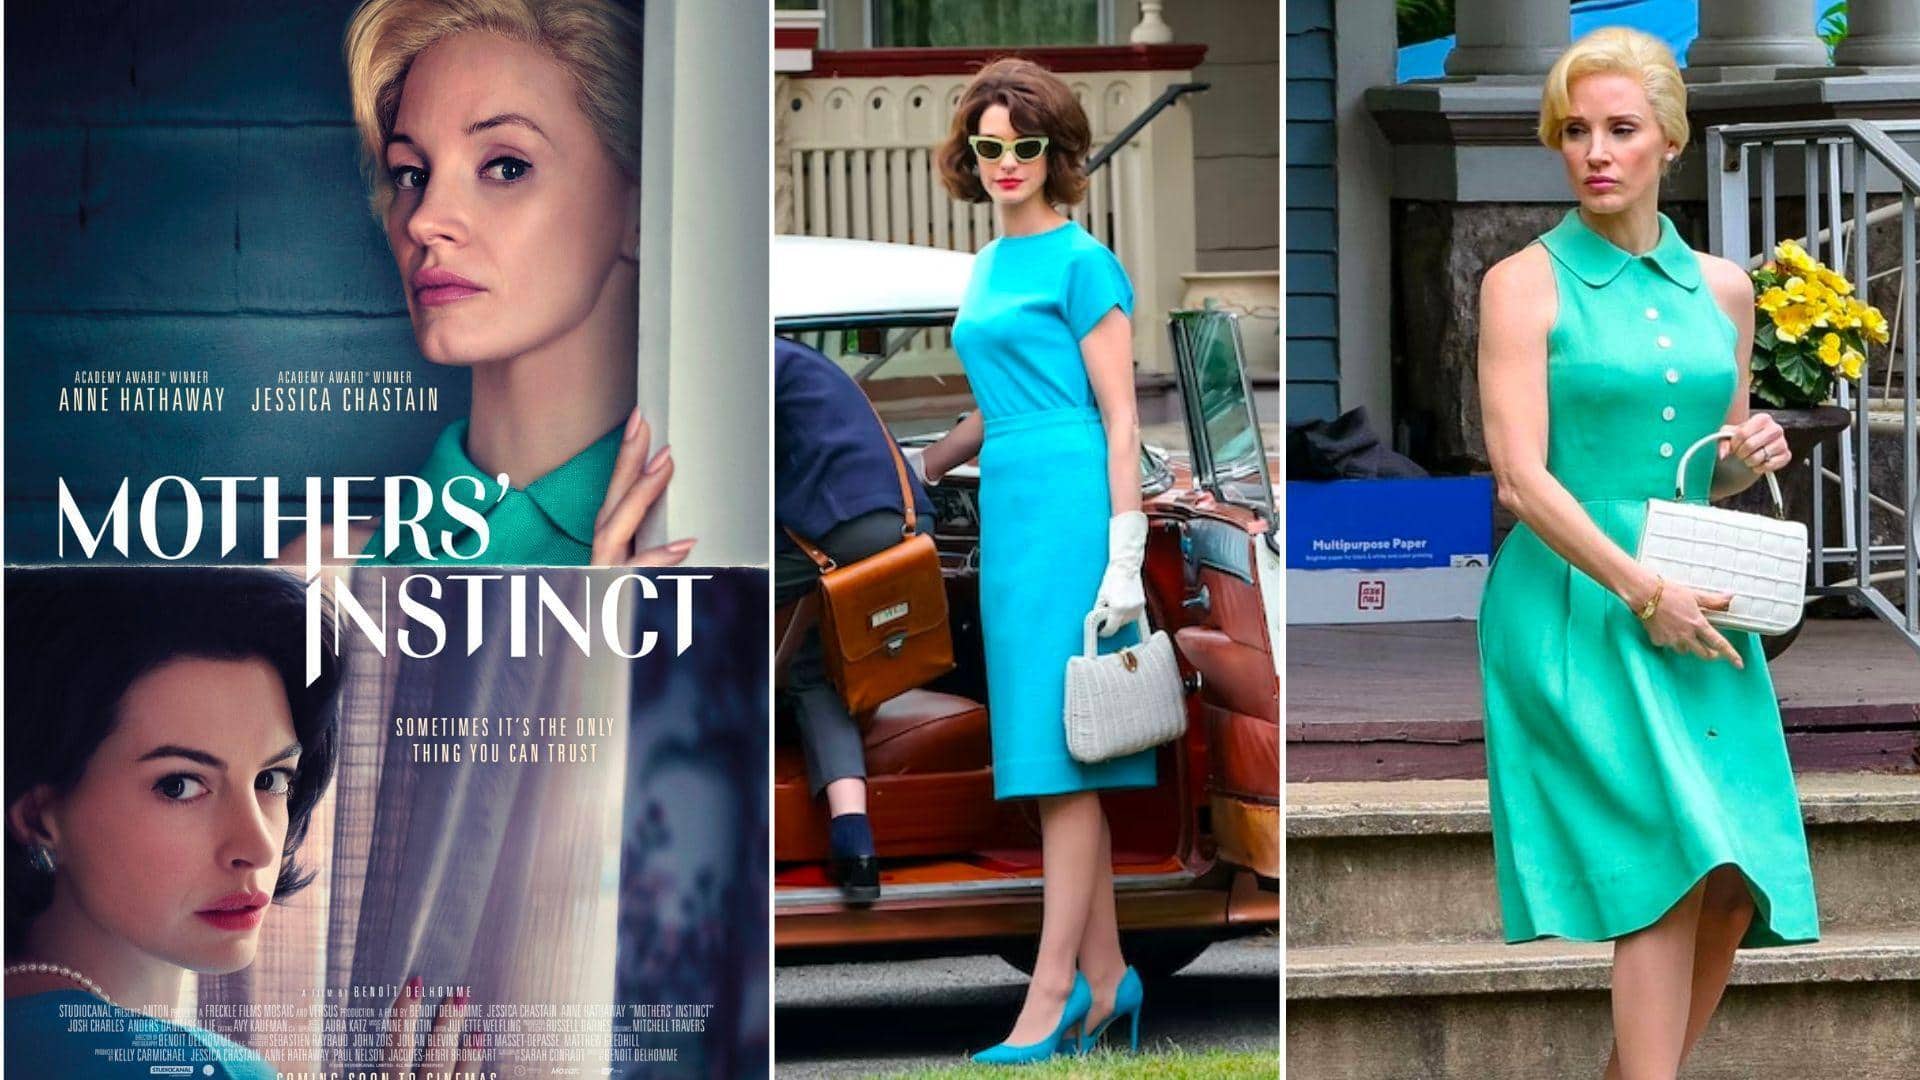 Anne Hathaway's 'Mothers' Instinct': Cast, summary, release date—a complete guide